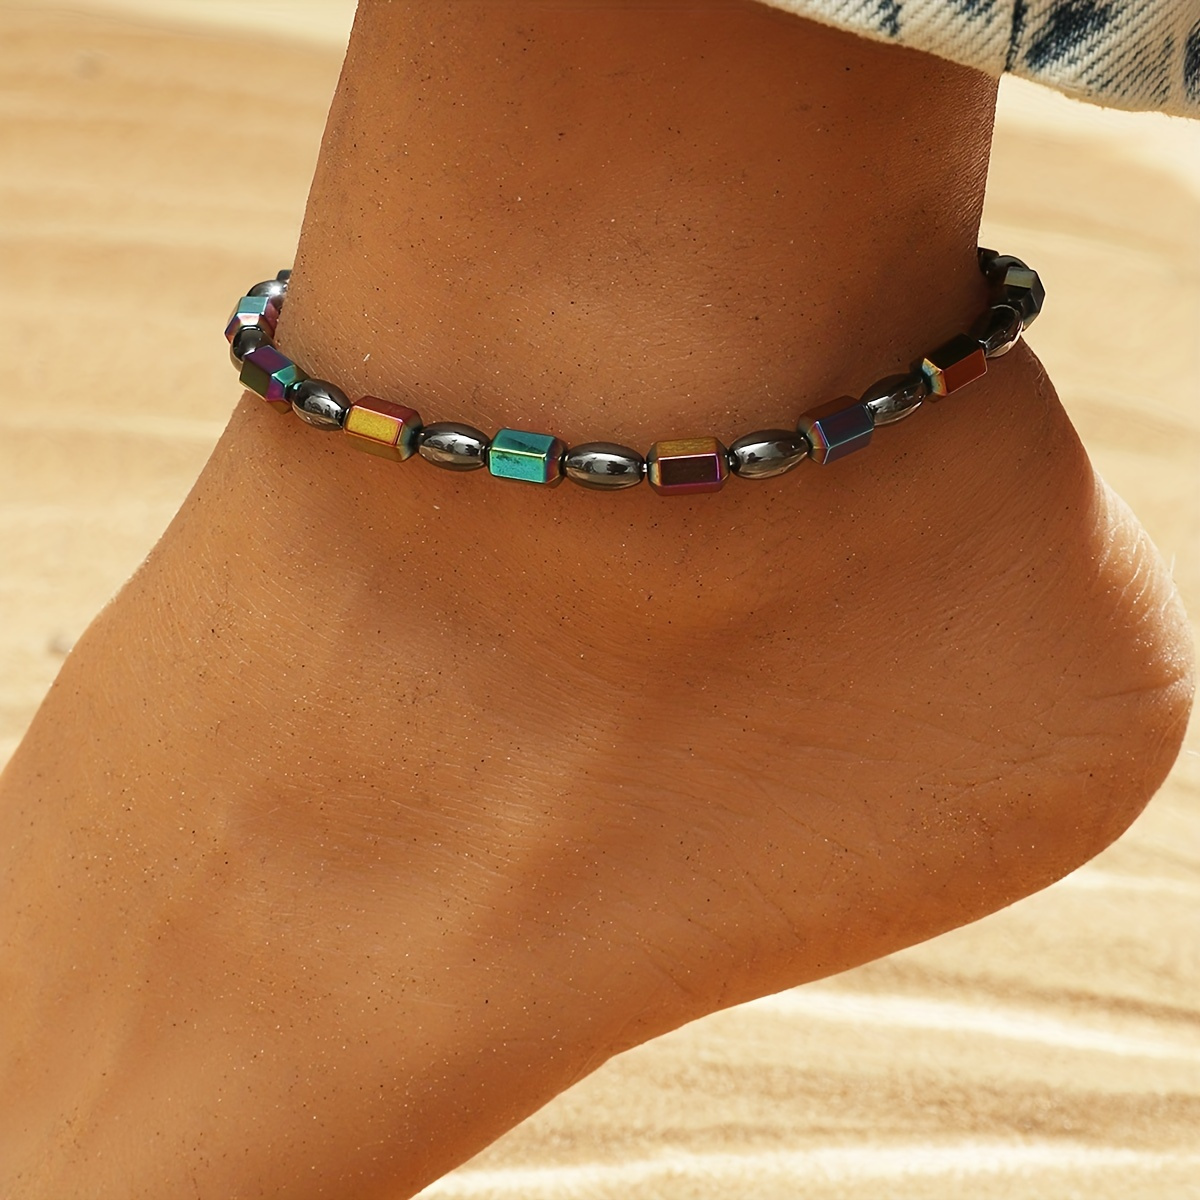 

Multicolored Natural Stone Ankle Bracelet, Elegant Bohemian Style Women's Elastic Anklet, Ideal Gift For Her - Perfect For Festive Occasions